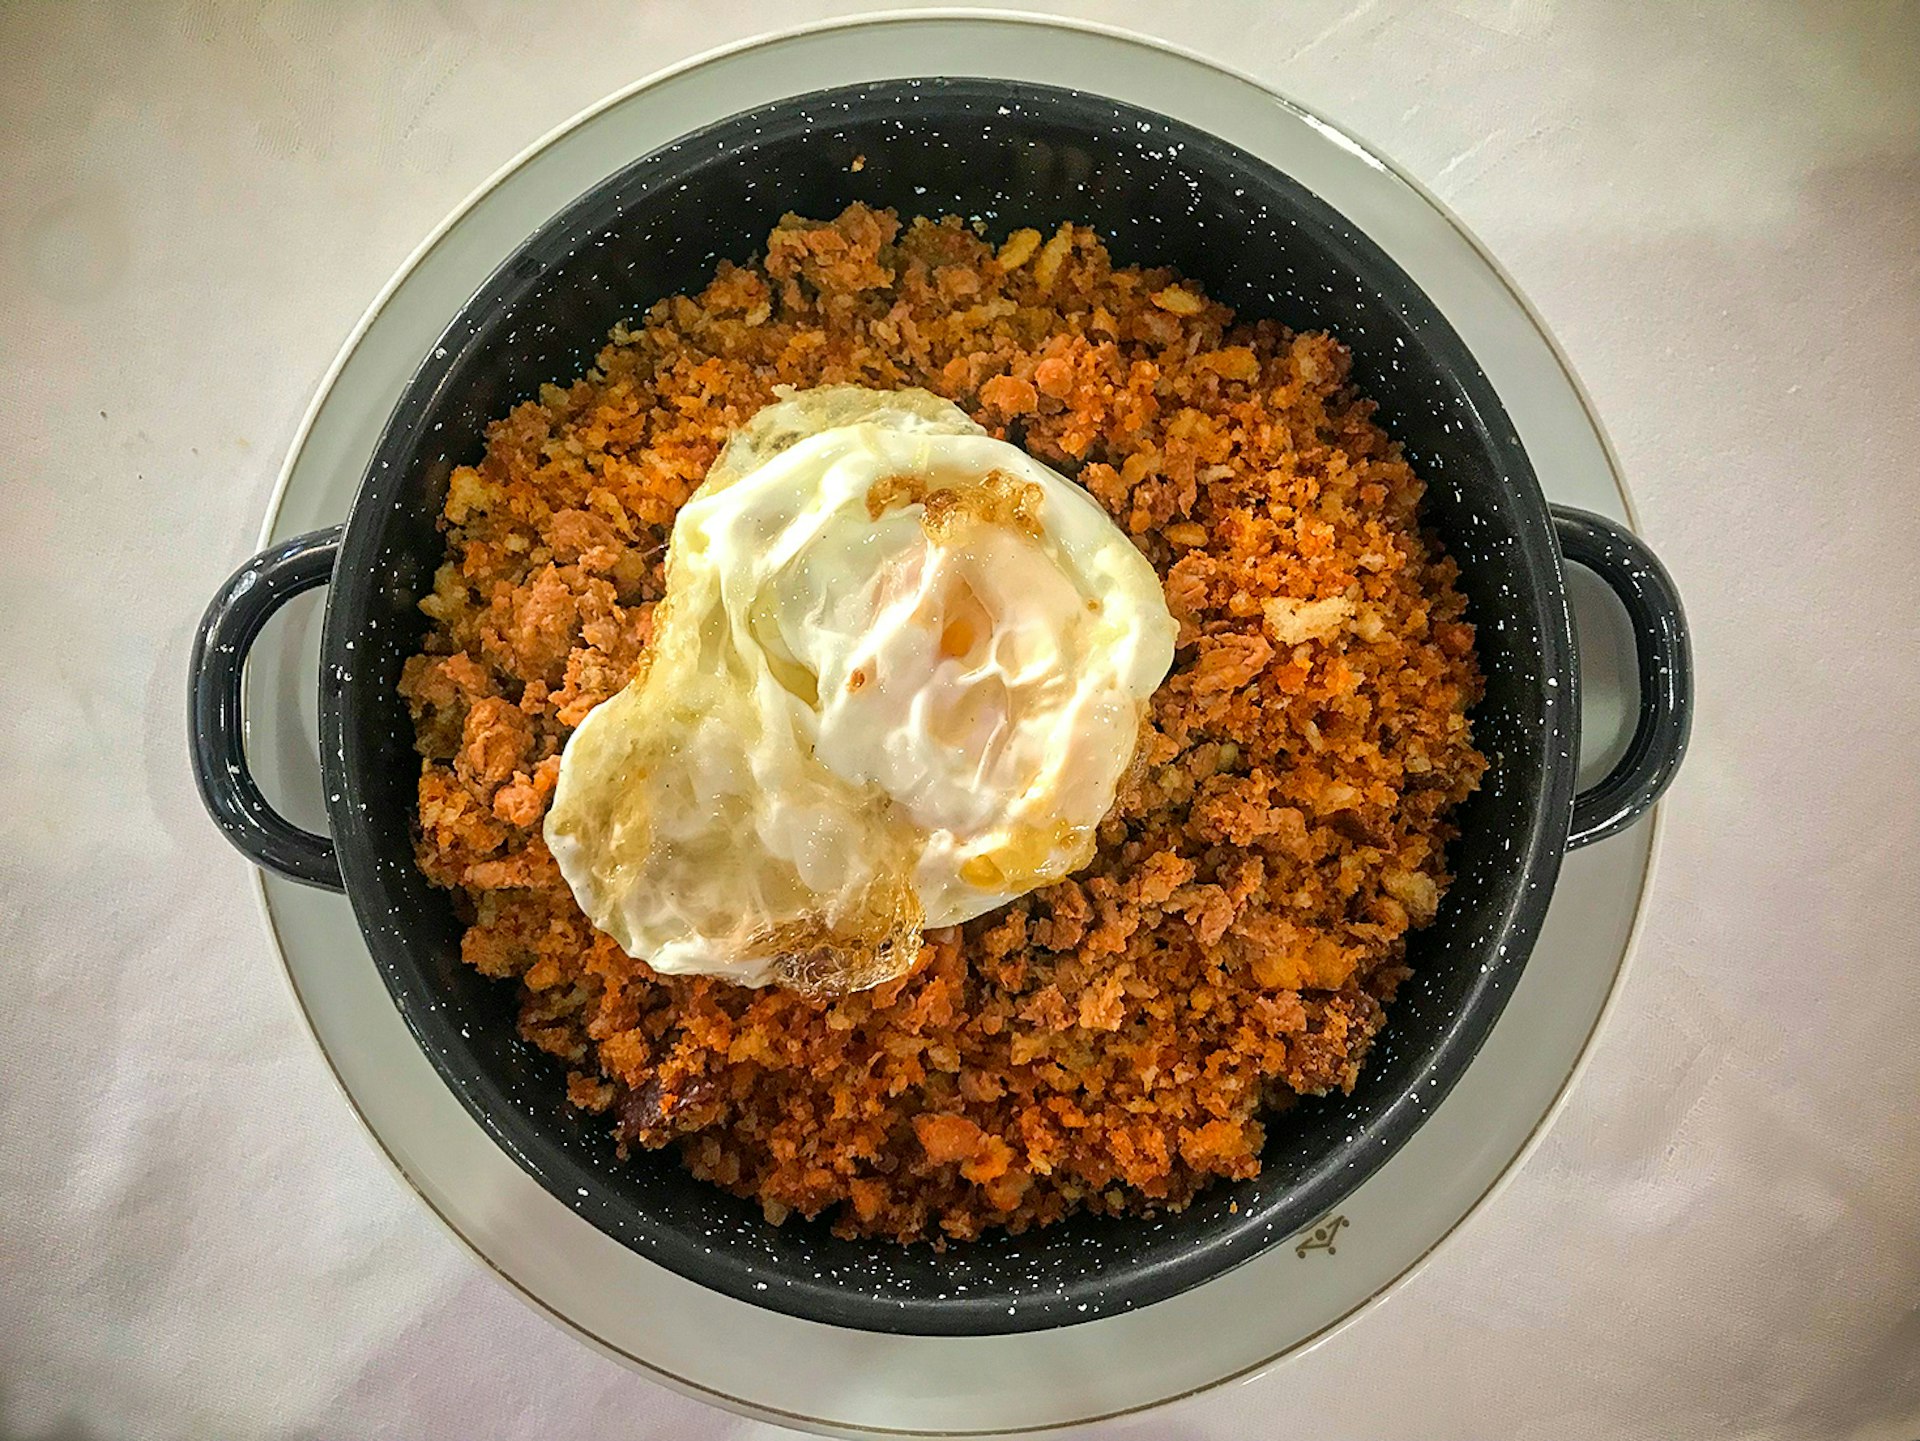 A black serving dish with handles, seen from above, is filled with a fine, lightly spiced, orange-coloured mixture and topped with a fried egg, a traditional dish known as migas trashumanica in Zamora, Spain